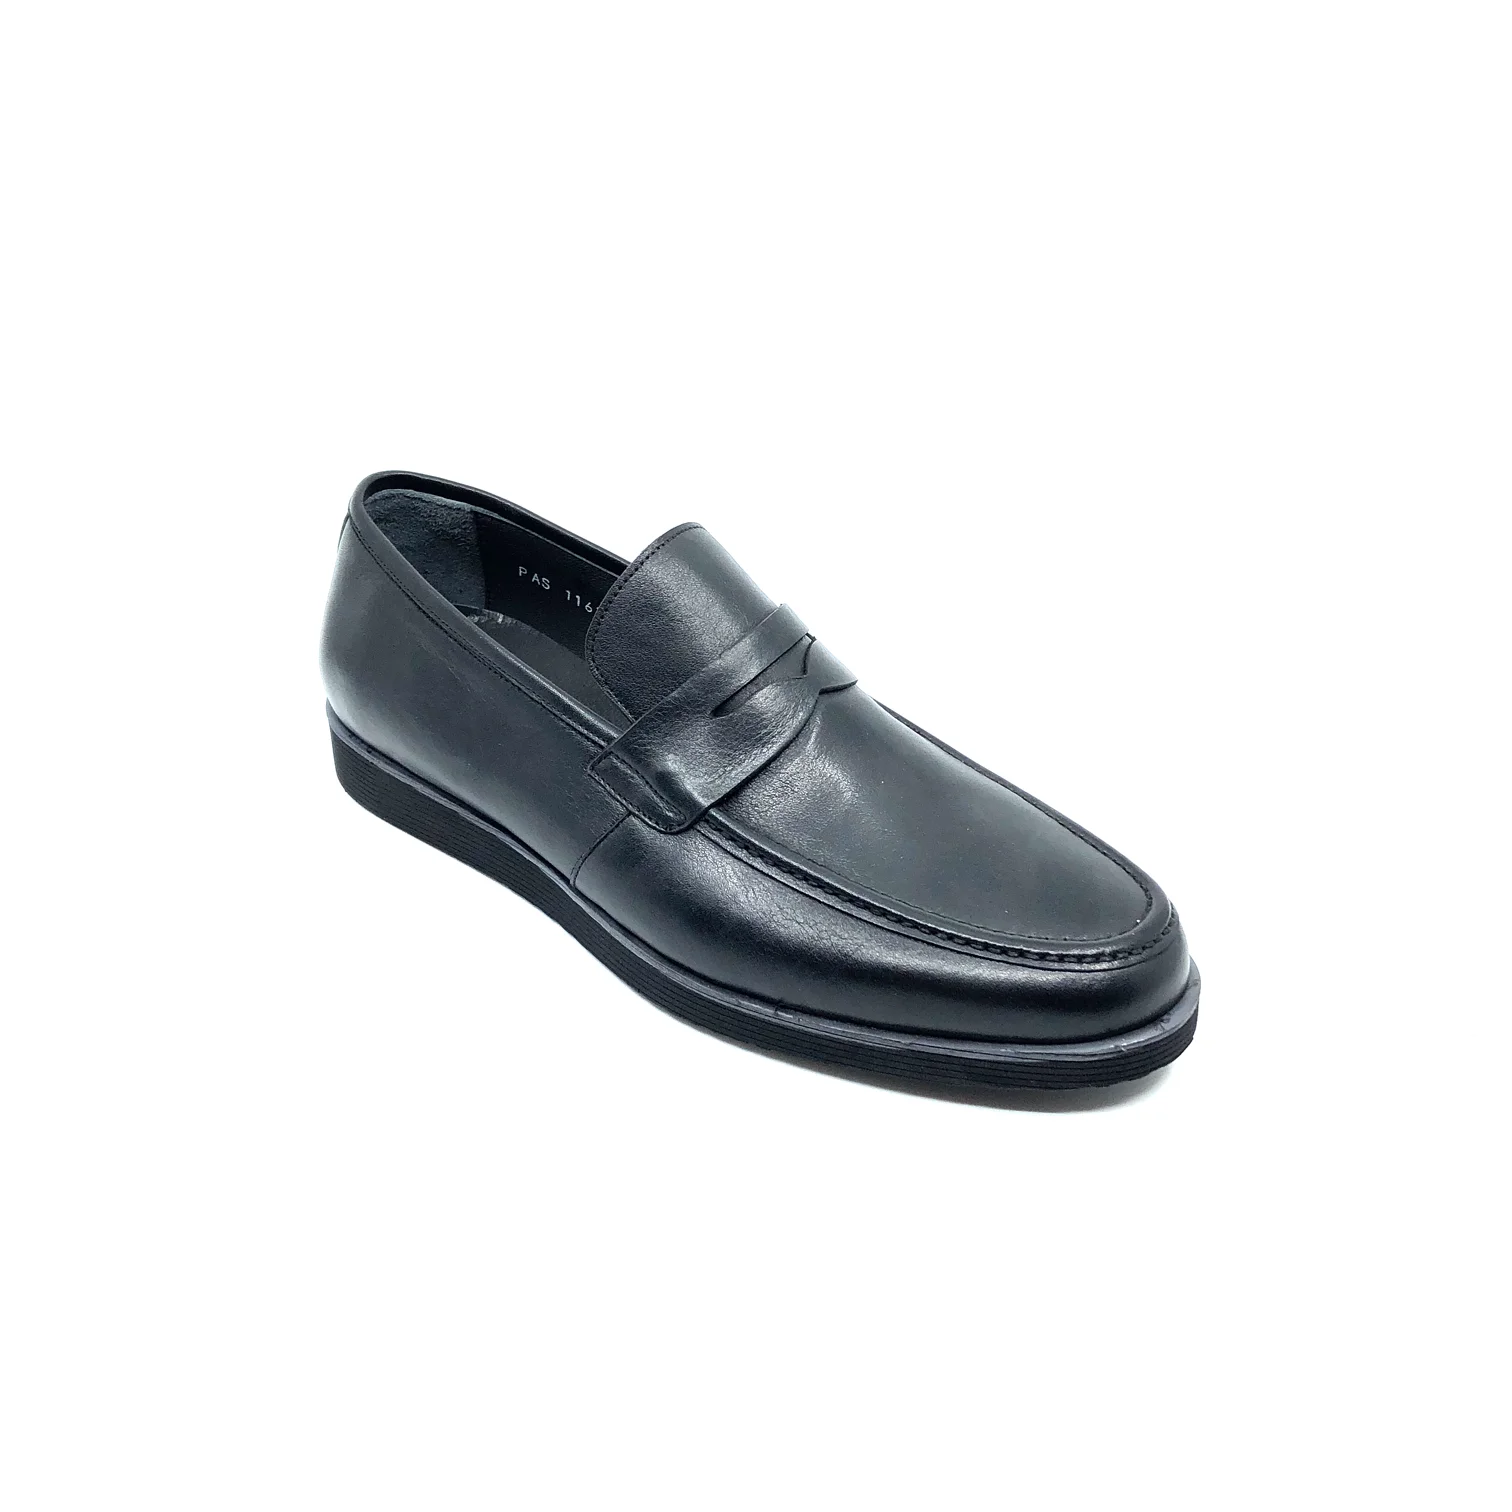 

Fosco Loafer Men's Classic Shoes %100 Genuine Leather Black Colour Eva Sole and Formal Business Shoes